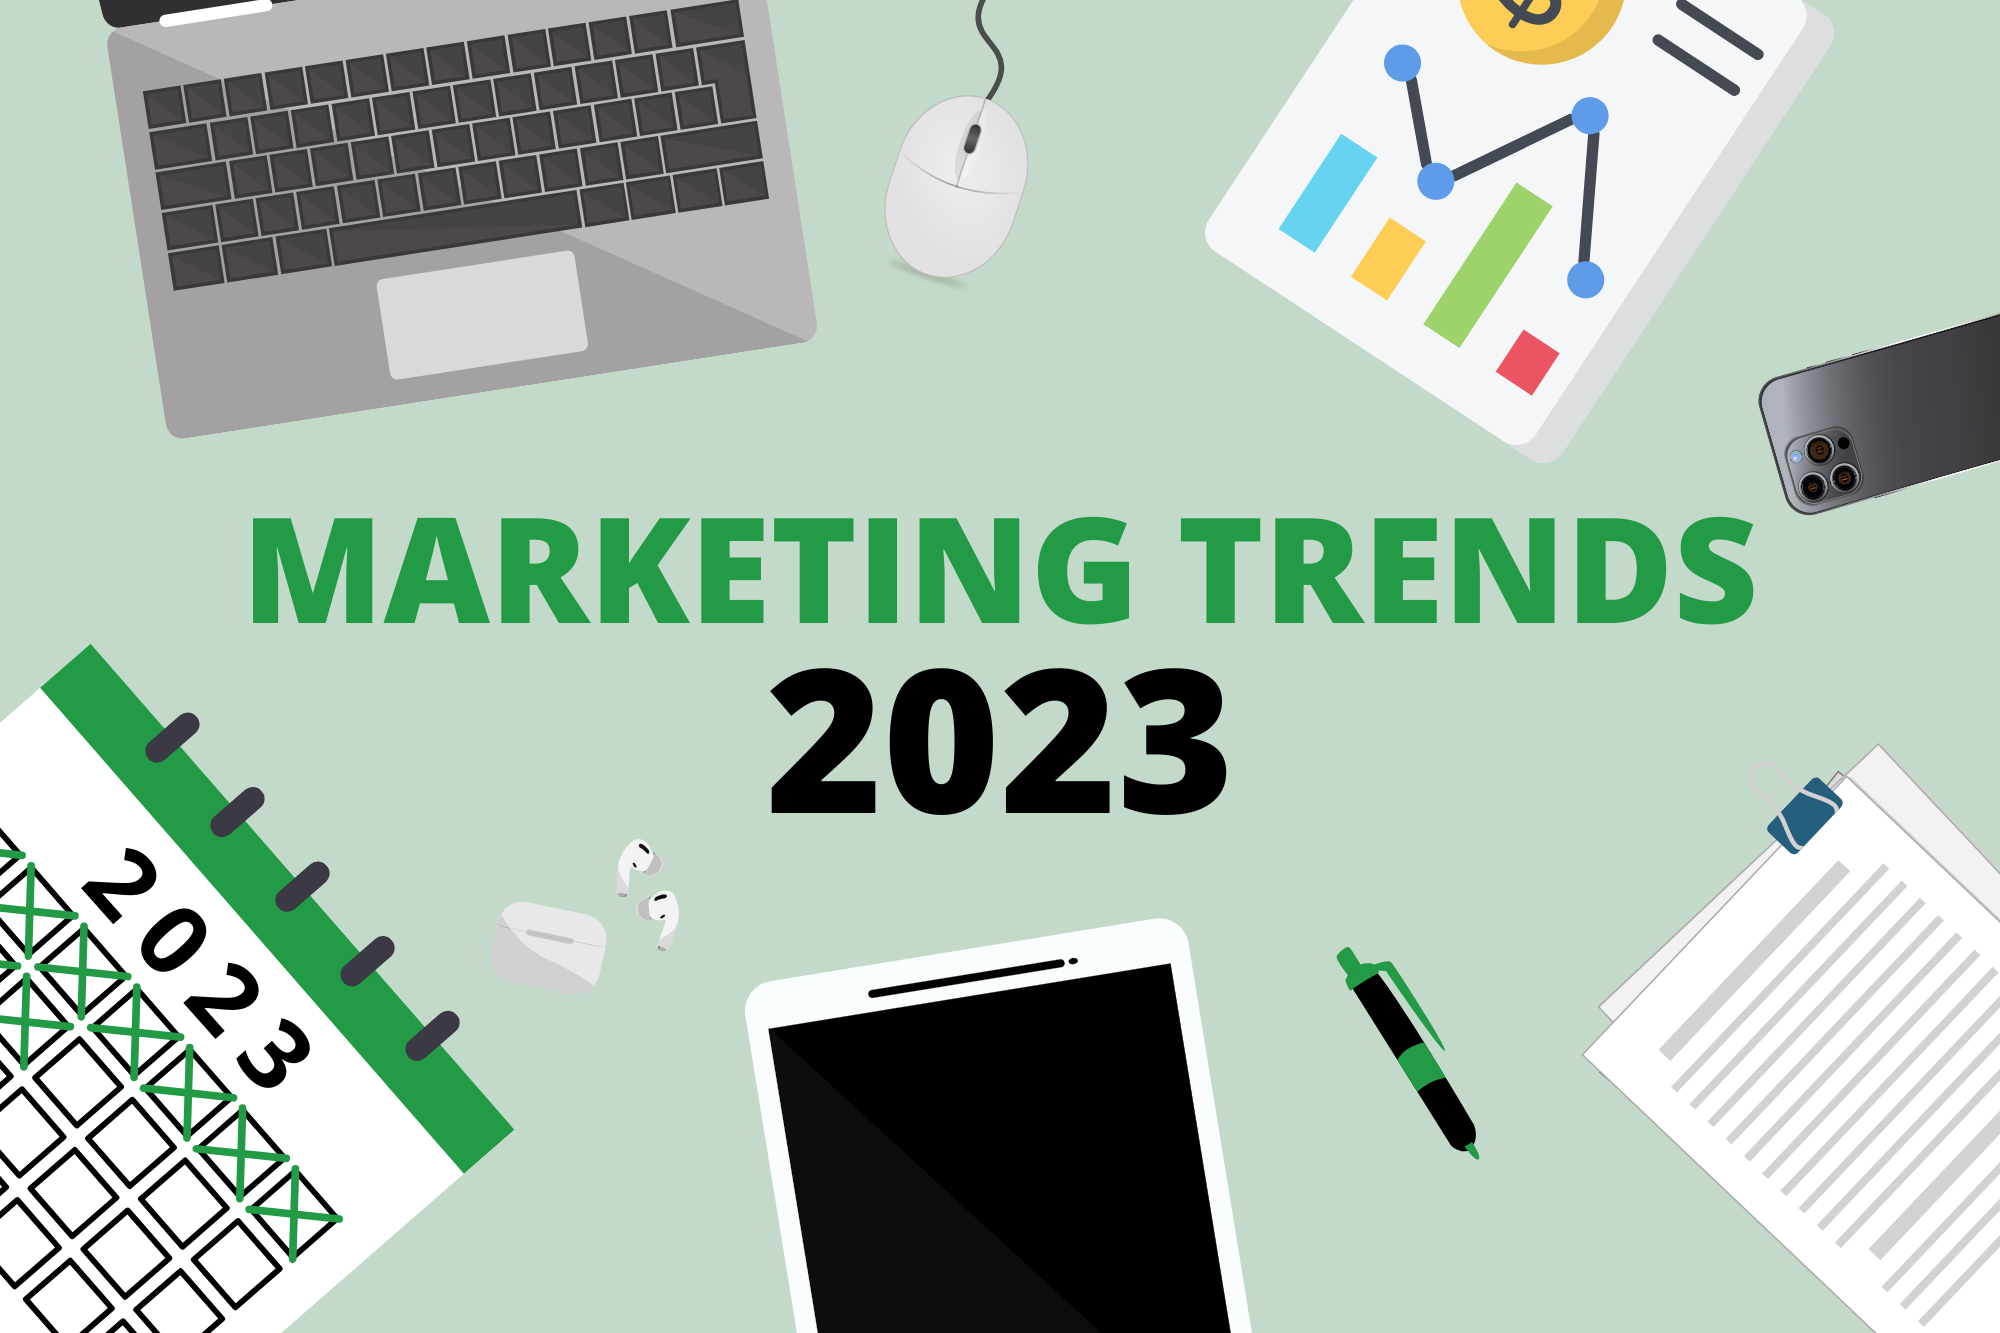 Start the New Year Off Right with These 2023 Marketing Trends